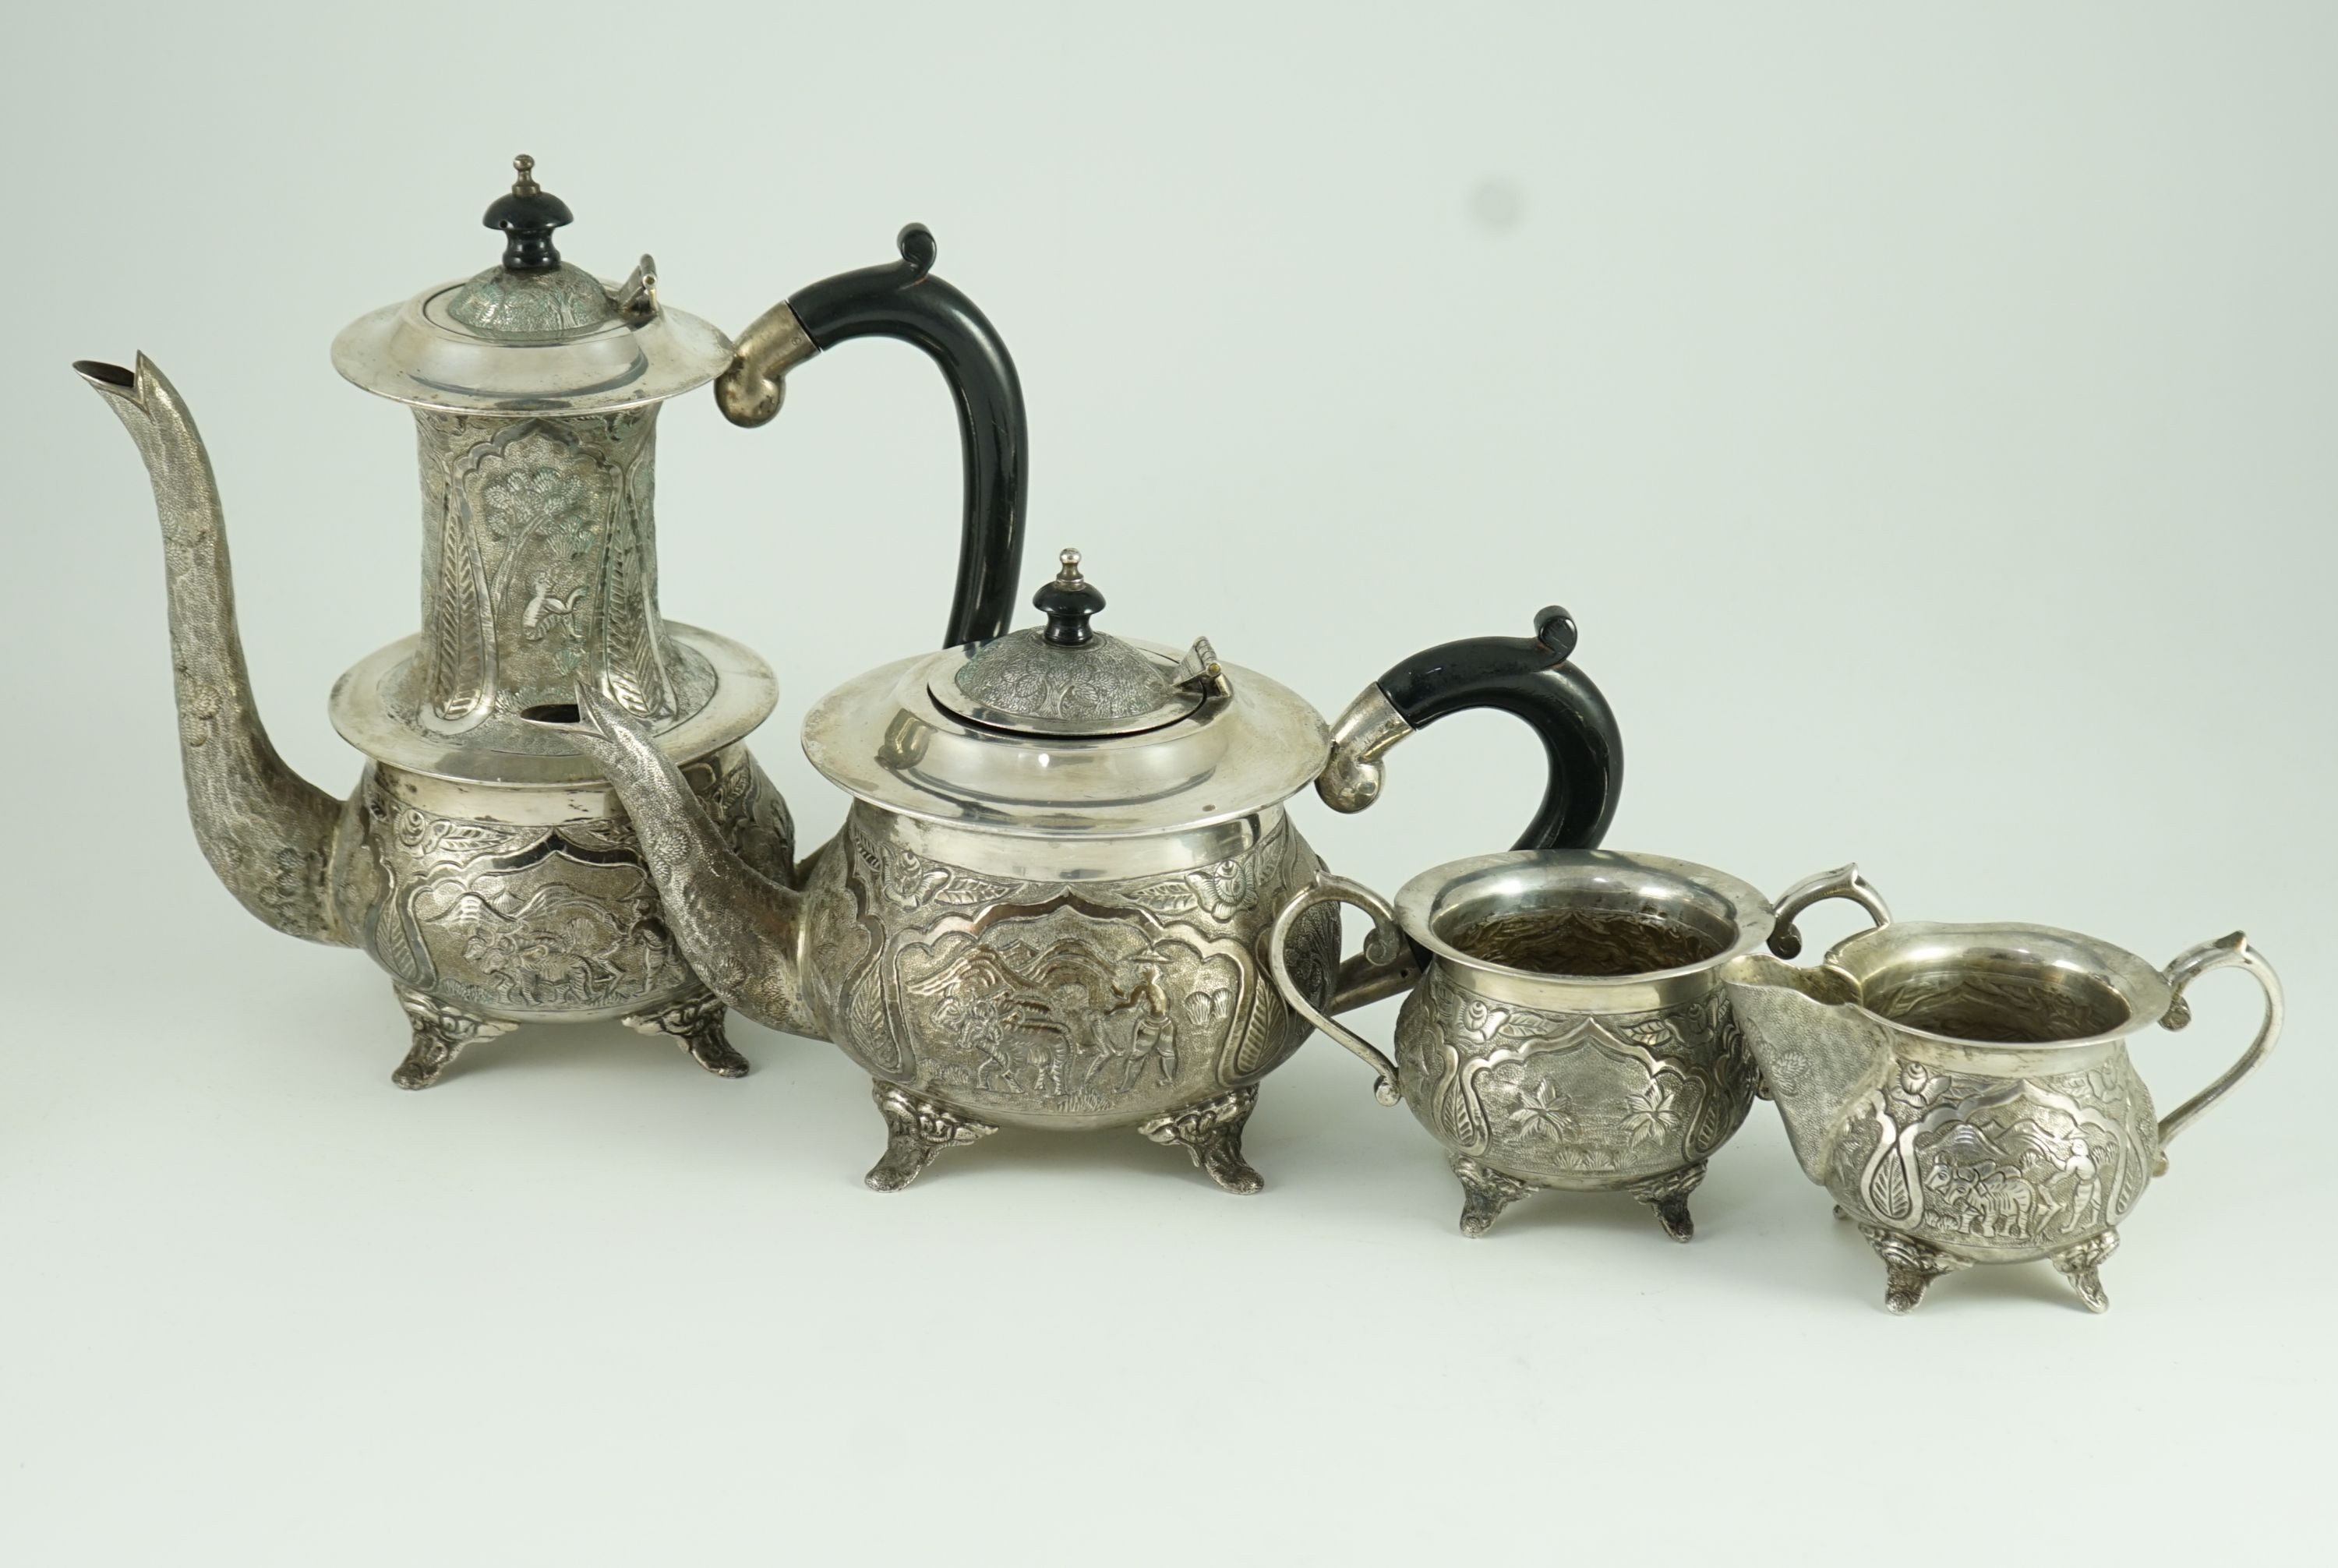 A 20th century Indian four piece silver tea and coffee service